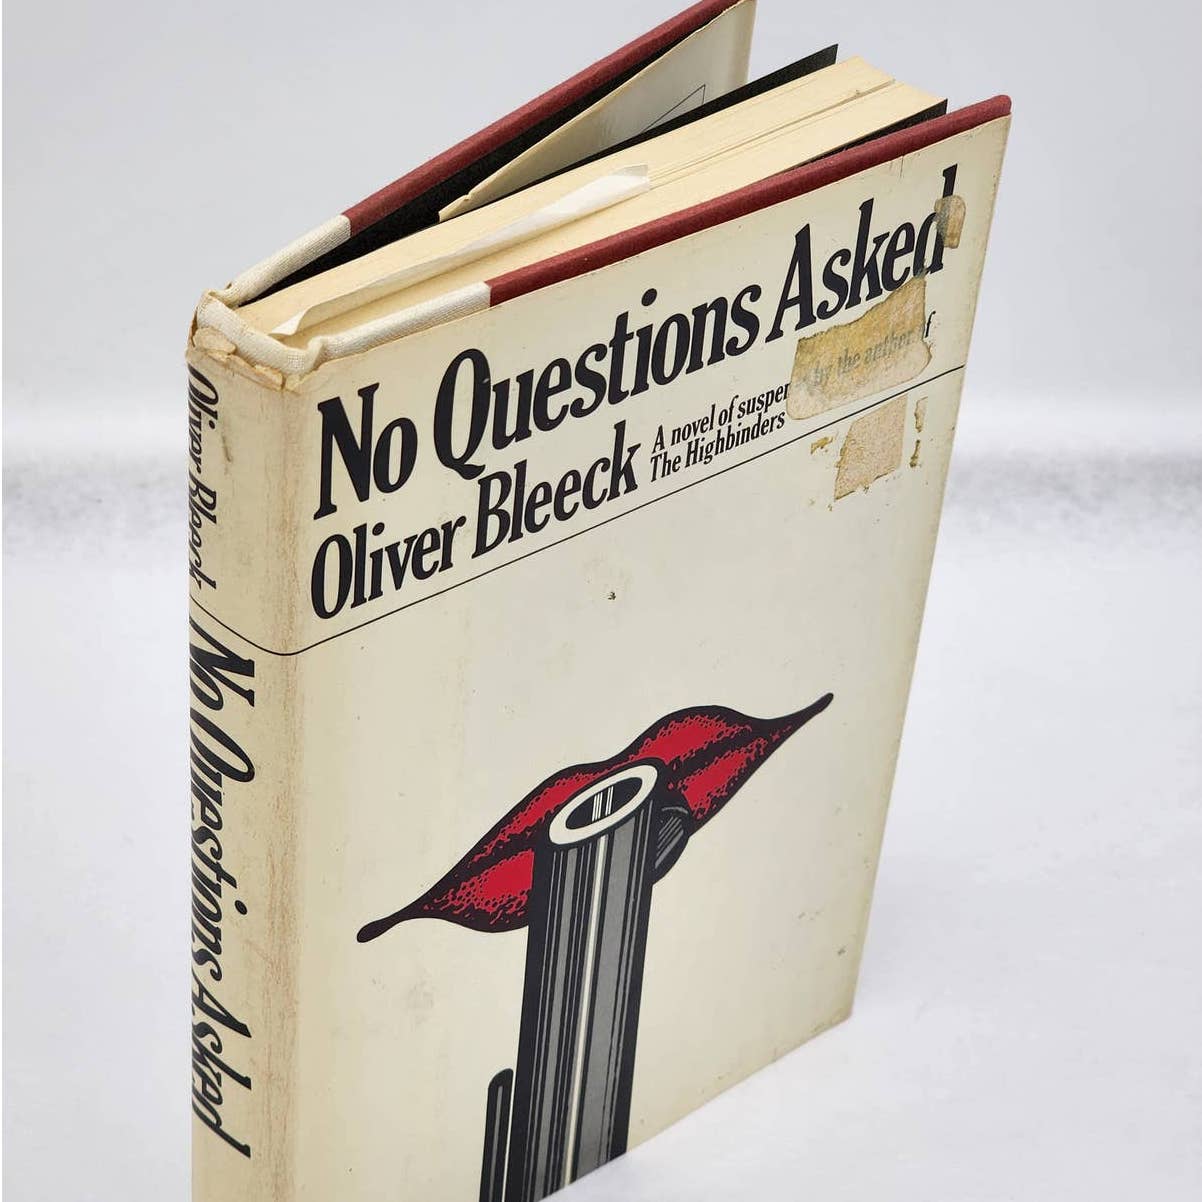 No Questions Asked By Oliver Bleeck A Novel Of Suspense Mystery Vintage 1976